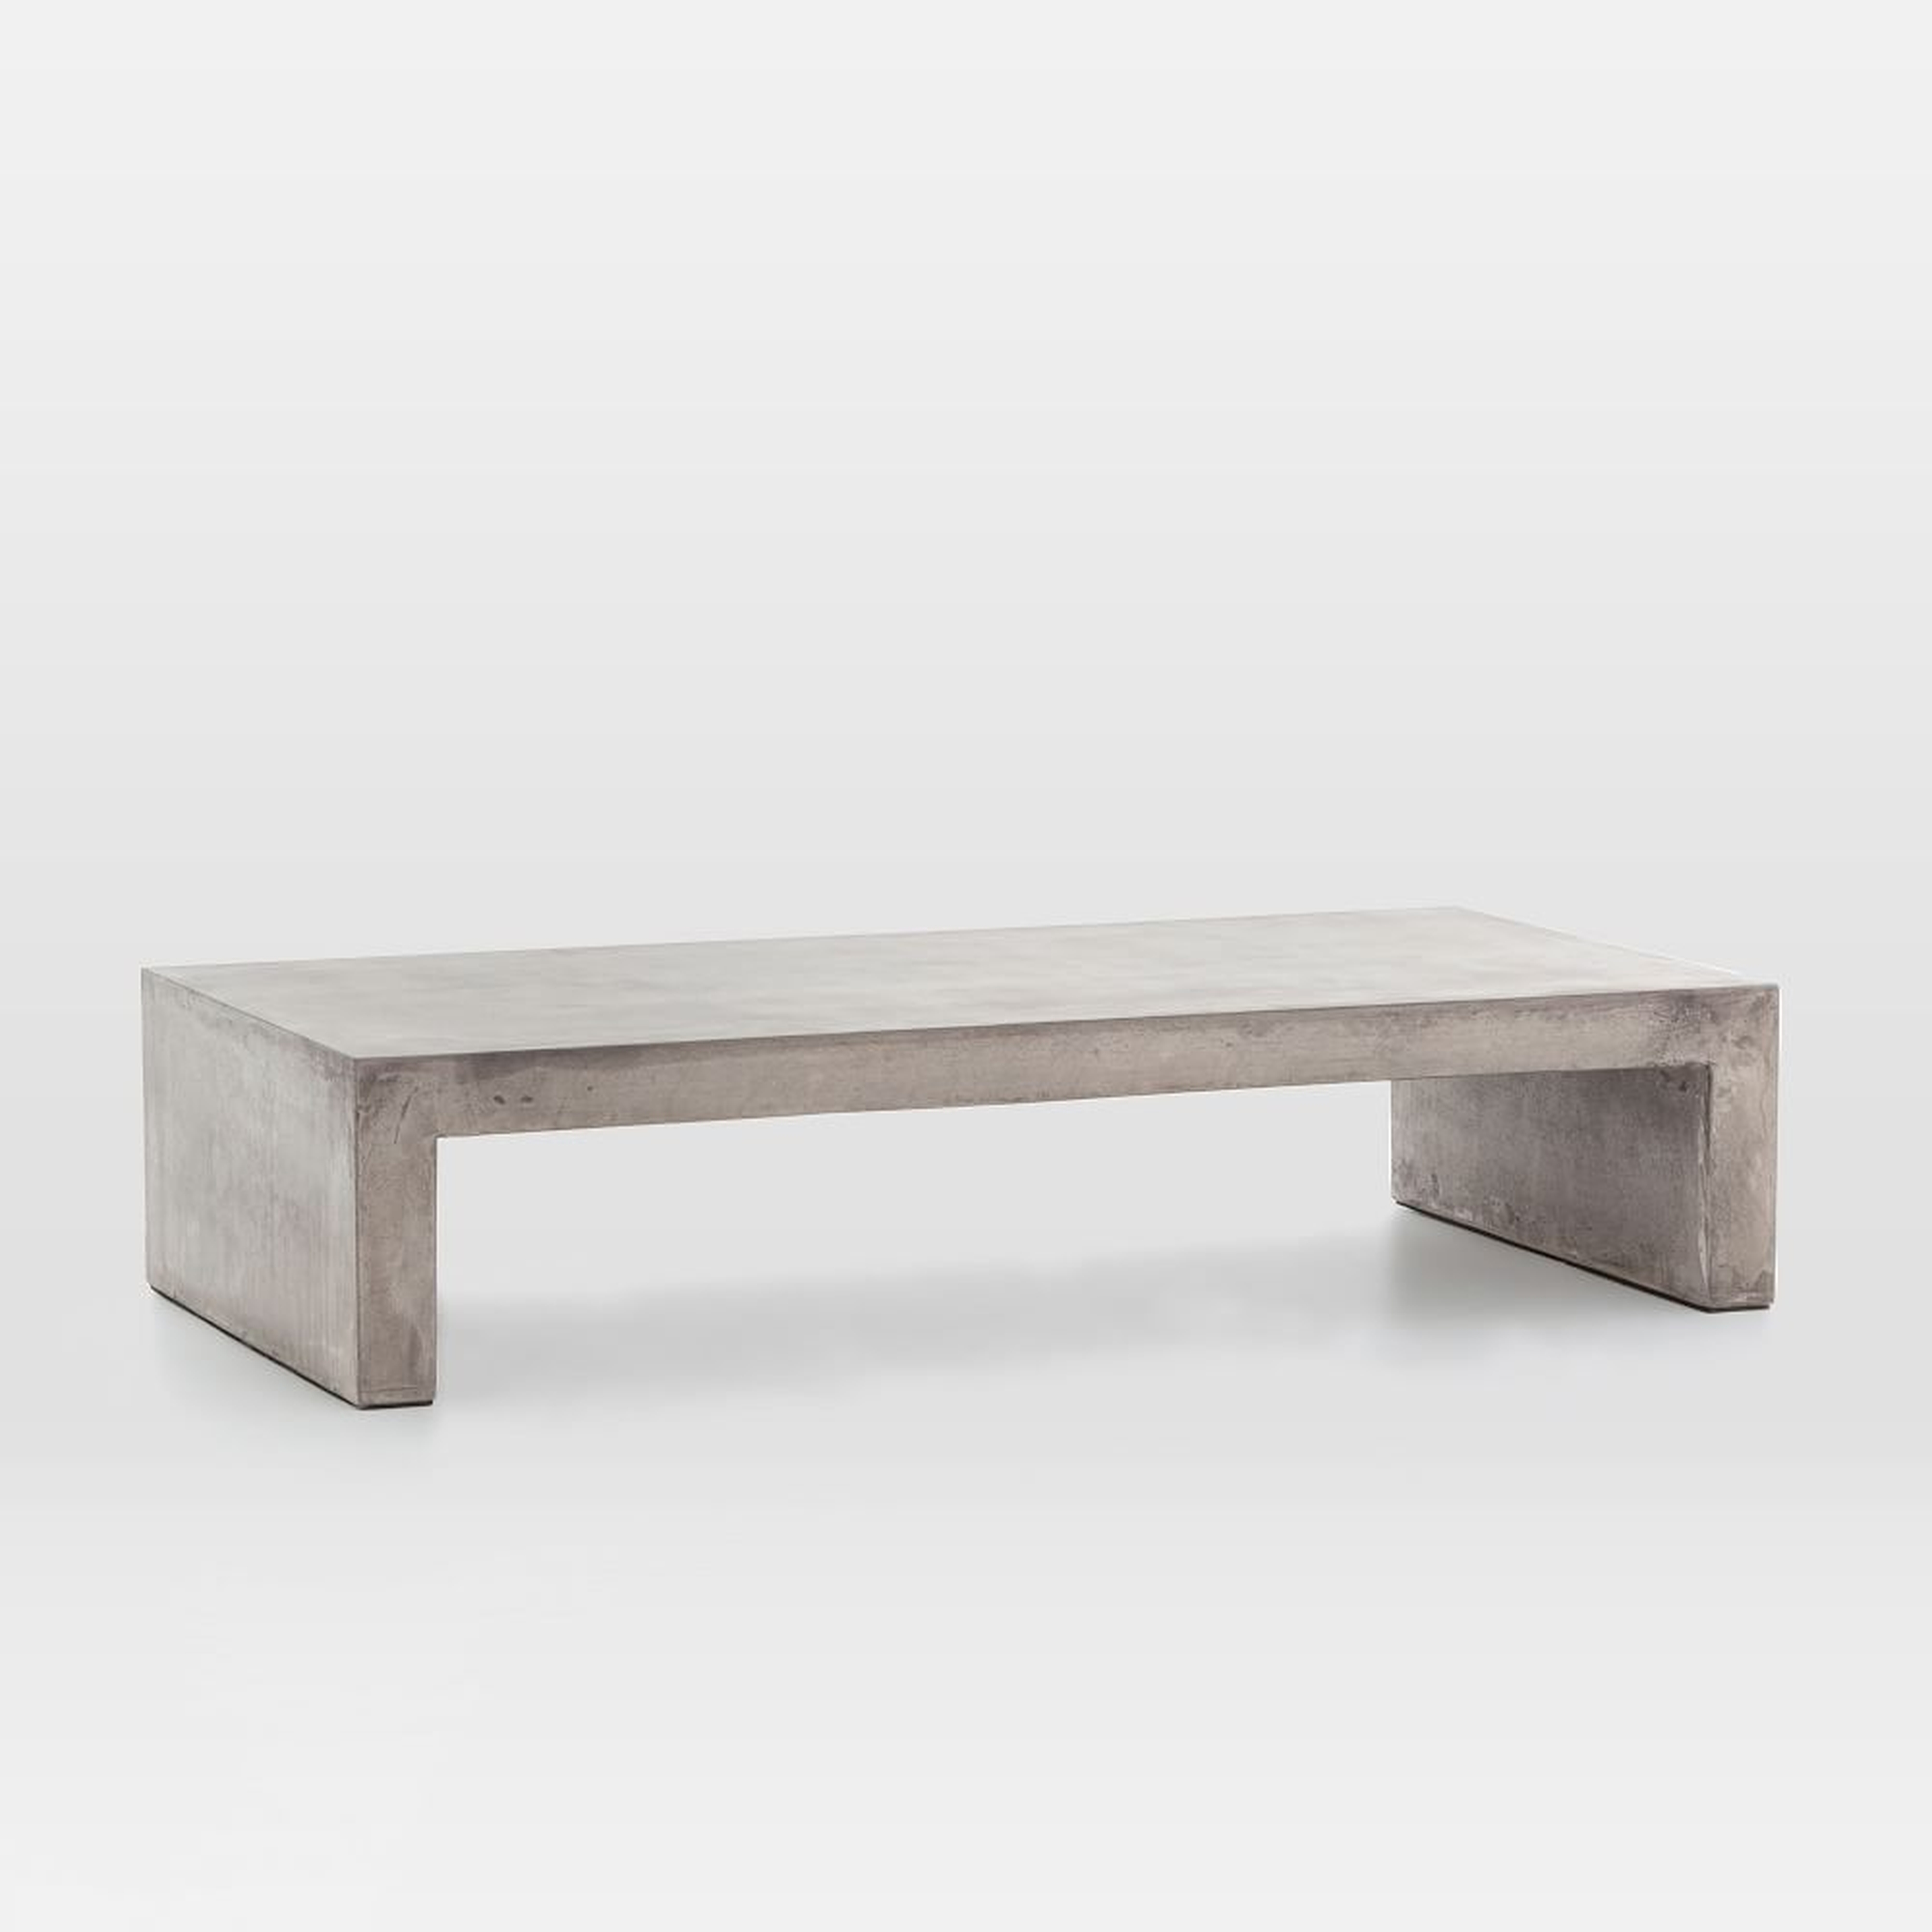 Concrete Waterfall 60" Outdoor Rectangle Coffee Table - West Elm